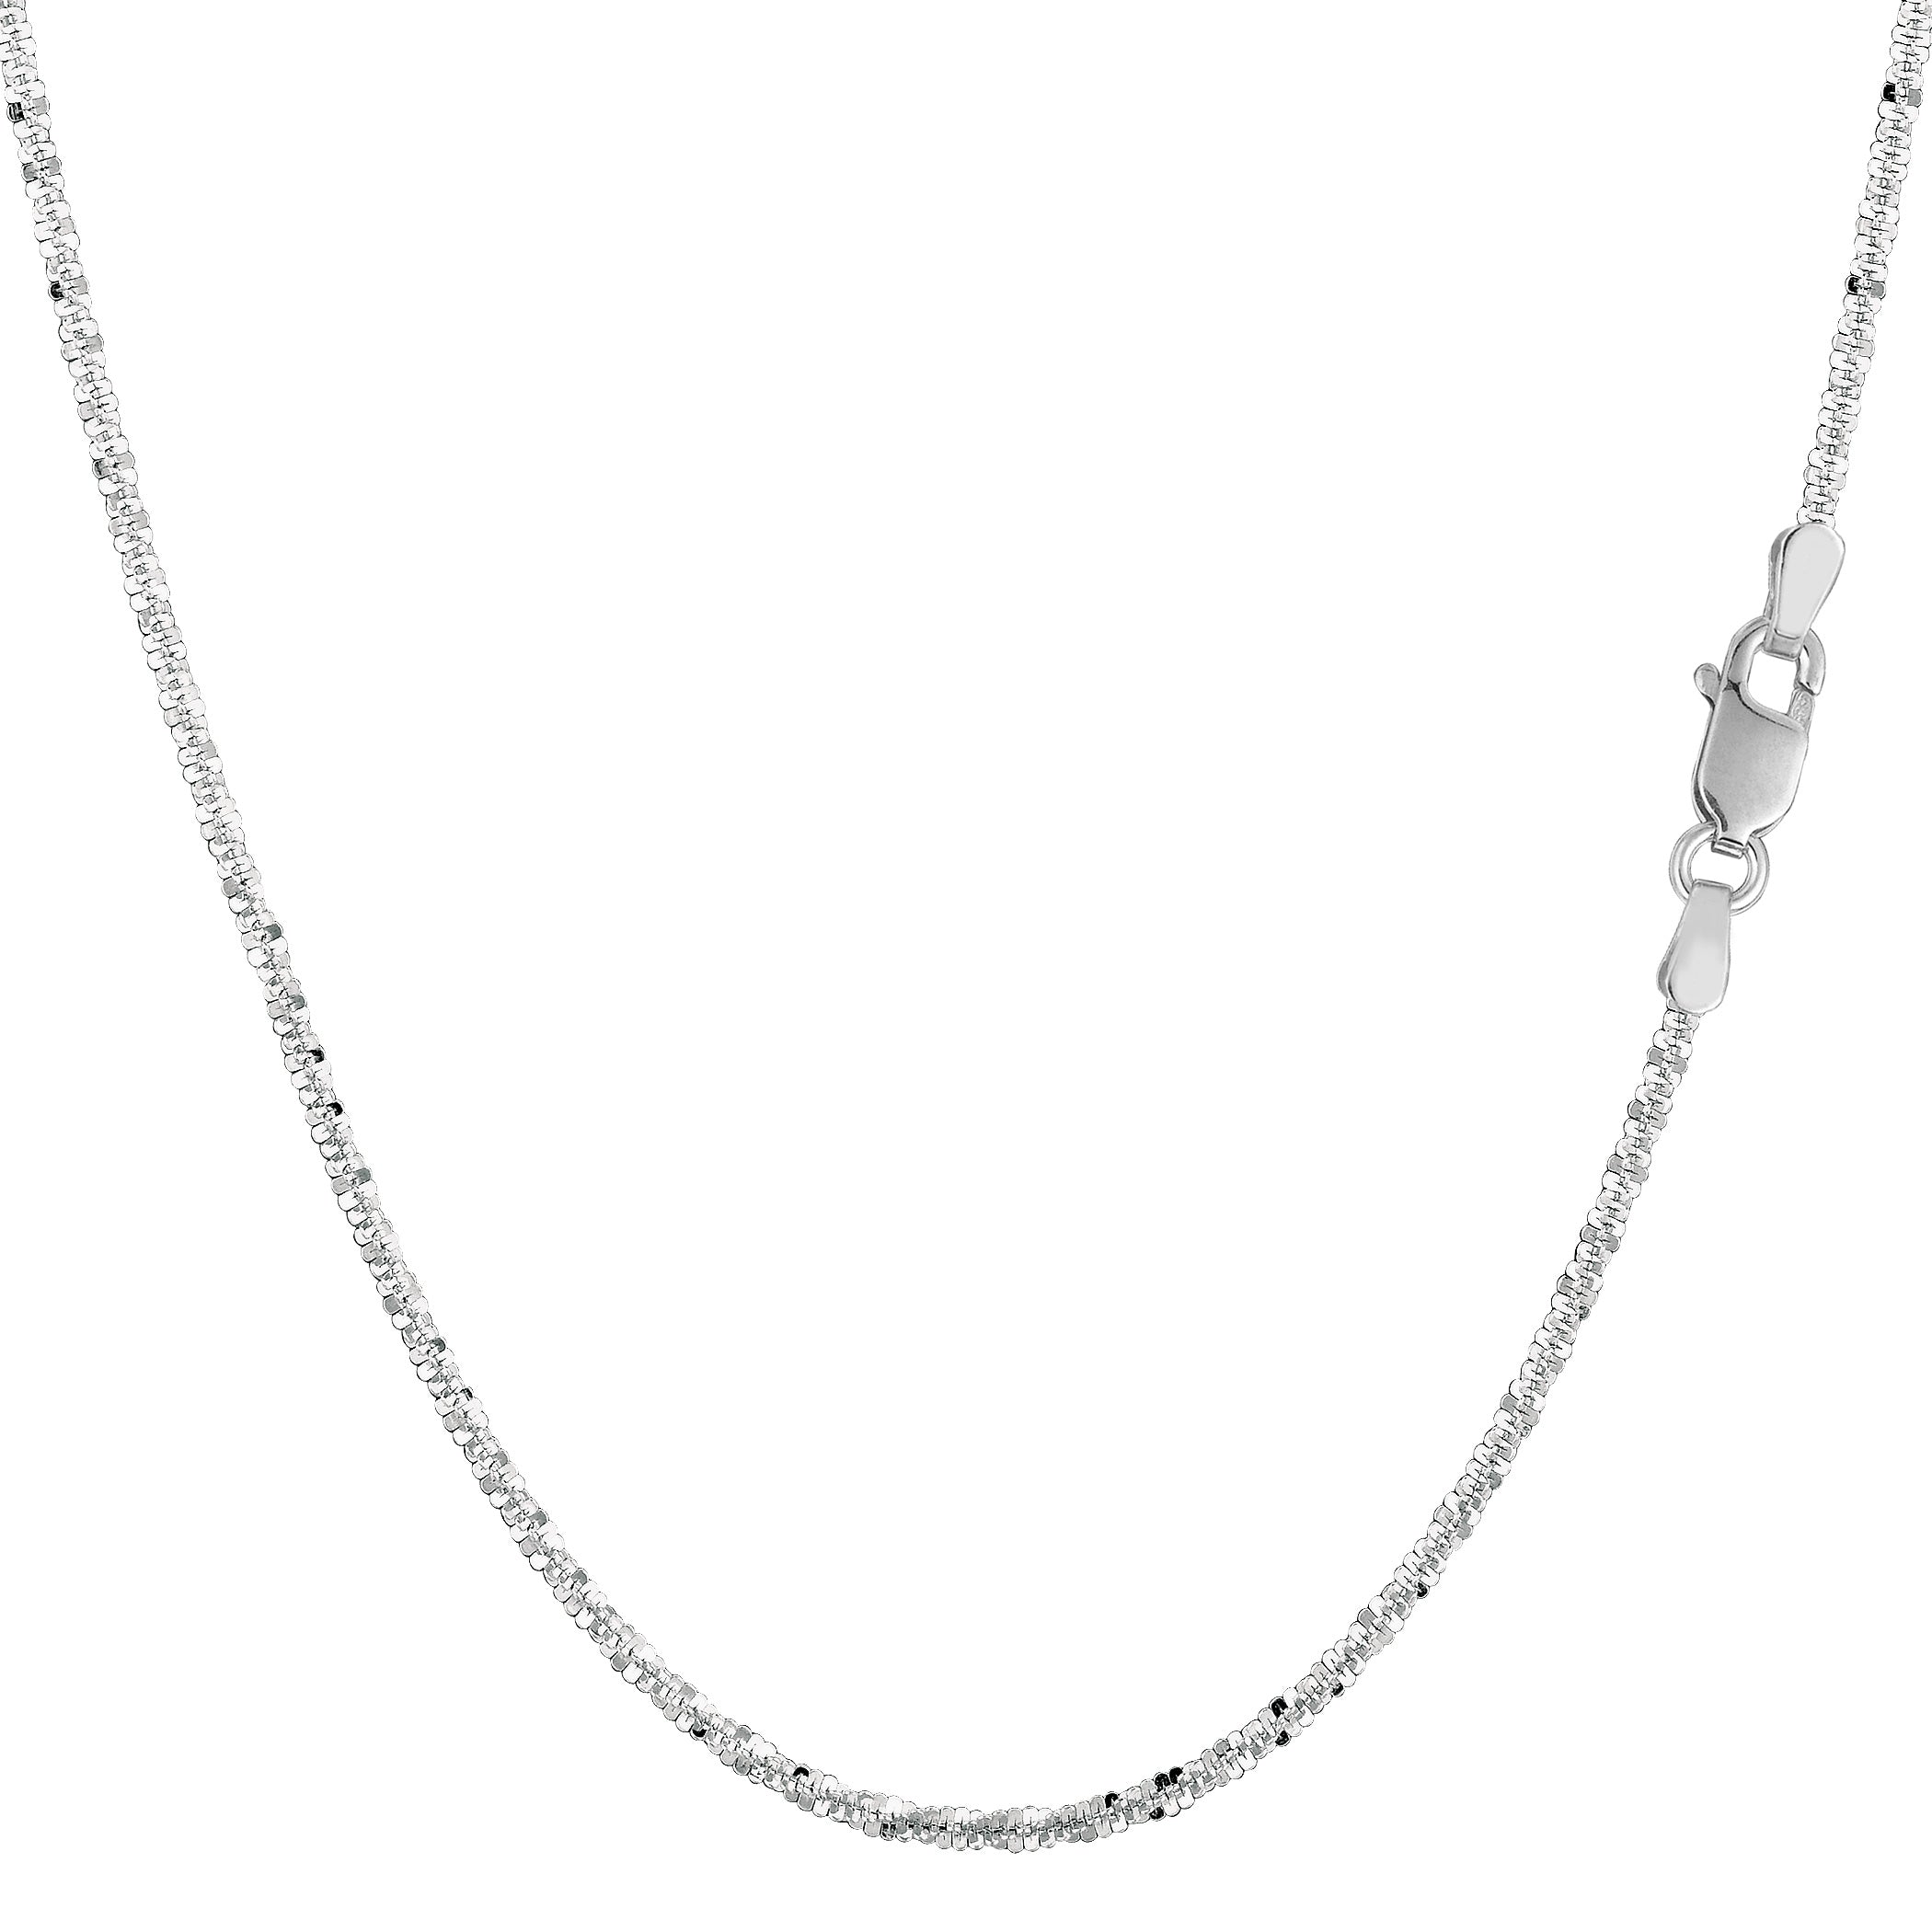 10k White Gold Sparkle Chain Necklace, 1.5mm fine designer jewelry for men and women